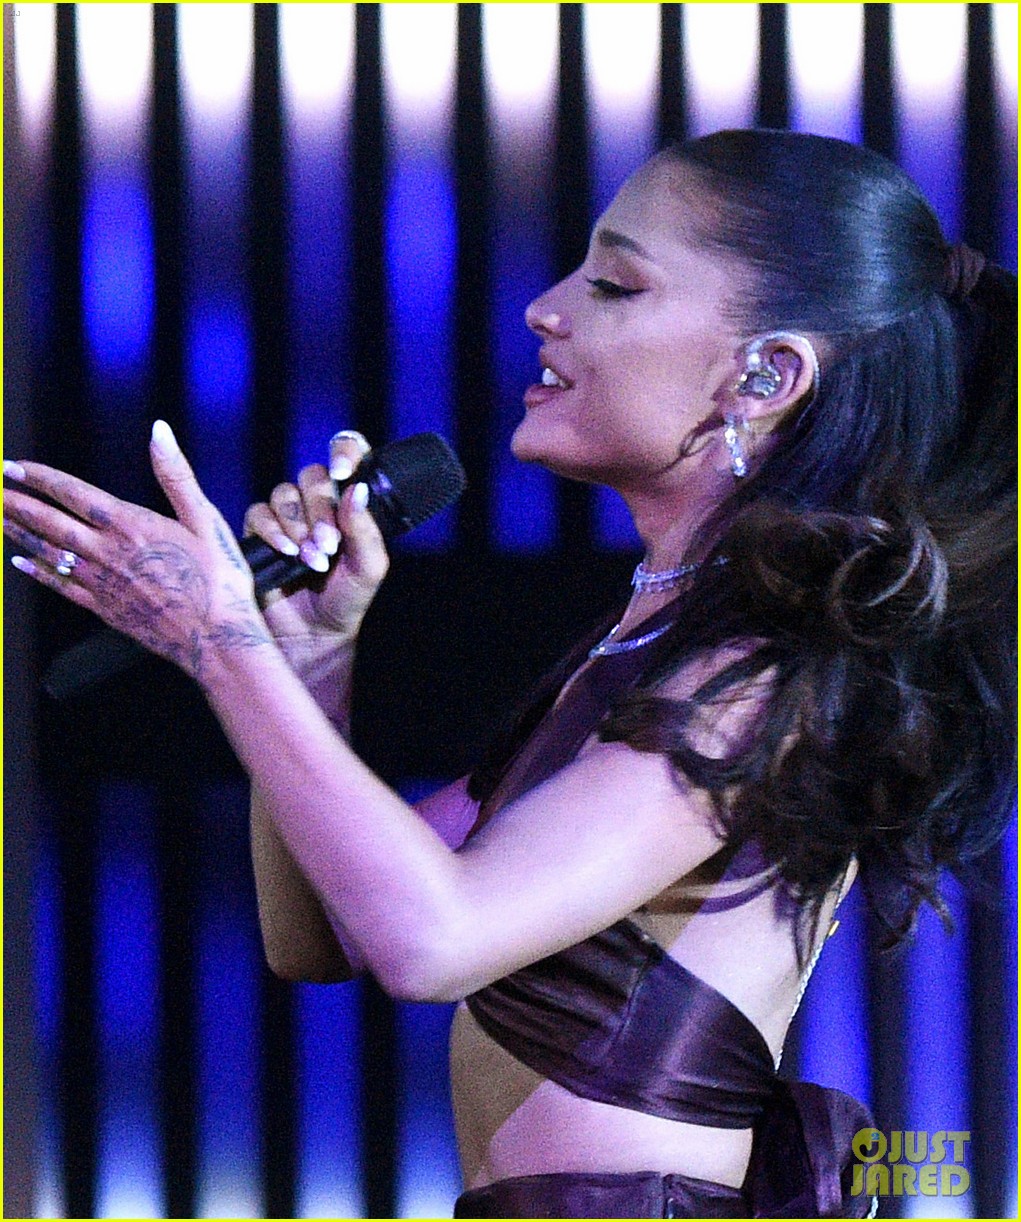 Hambre pasta multitud Ariana Grande Wears Wedding Ring While Performing with The Weeknd at  iHeartRadio Music Awards 2021!: Photo 4561300 | 2021 iHeartRadio Music  Awards, Ariana Grande, iHeartRadio Music Awards, The Weeknd Pictures | Just  Jared